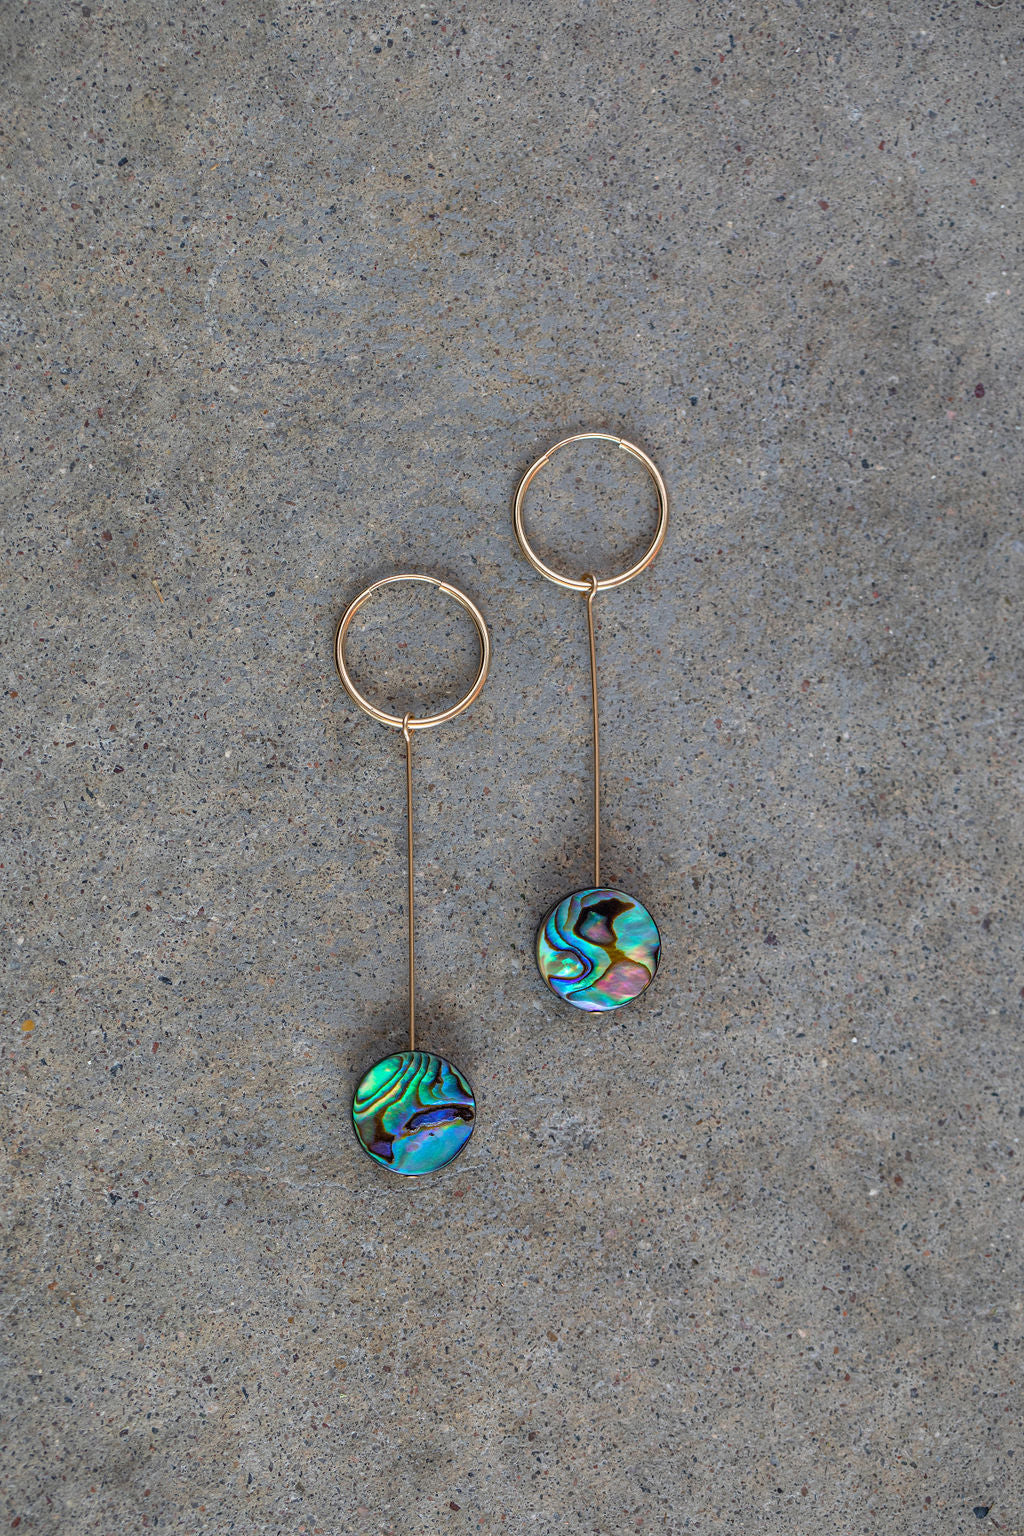 Minimalism from the Sea Iridescence Abalone Shell Discs on 14k gold fill wire & hoops. These hang down about 2".